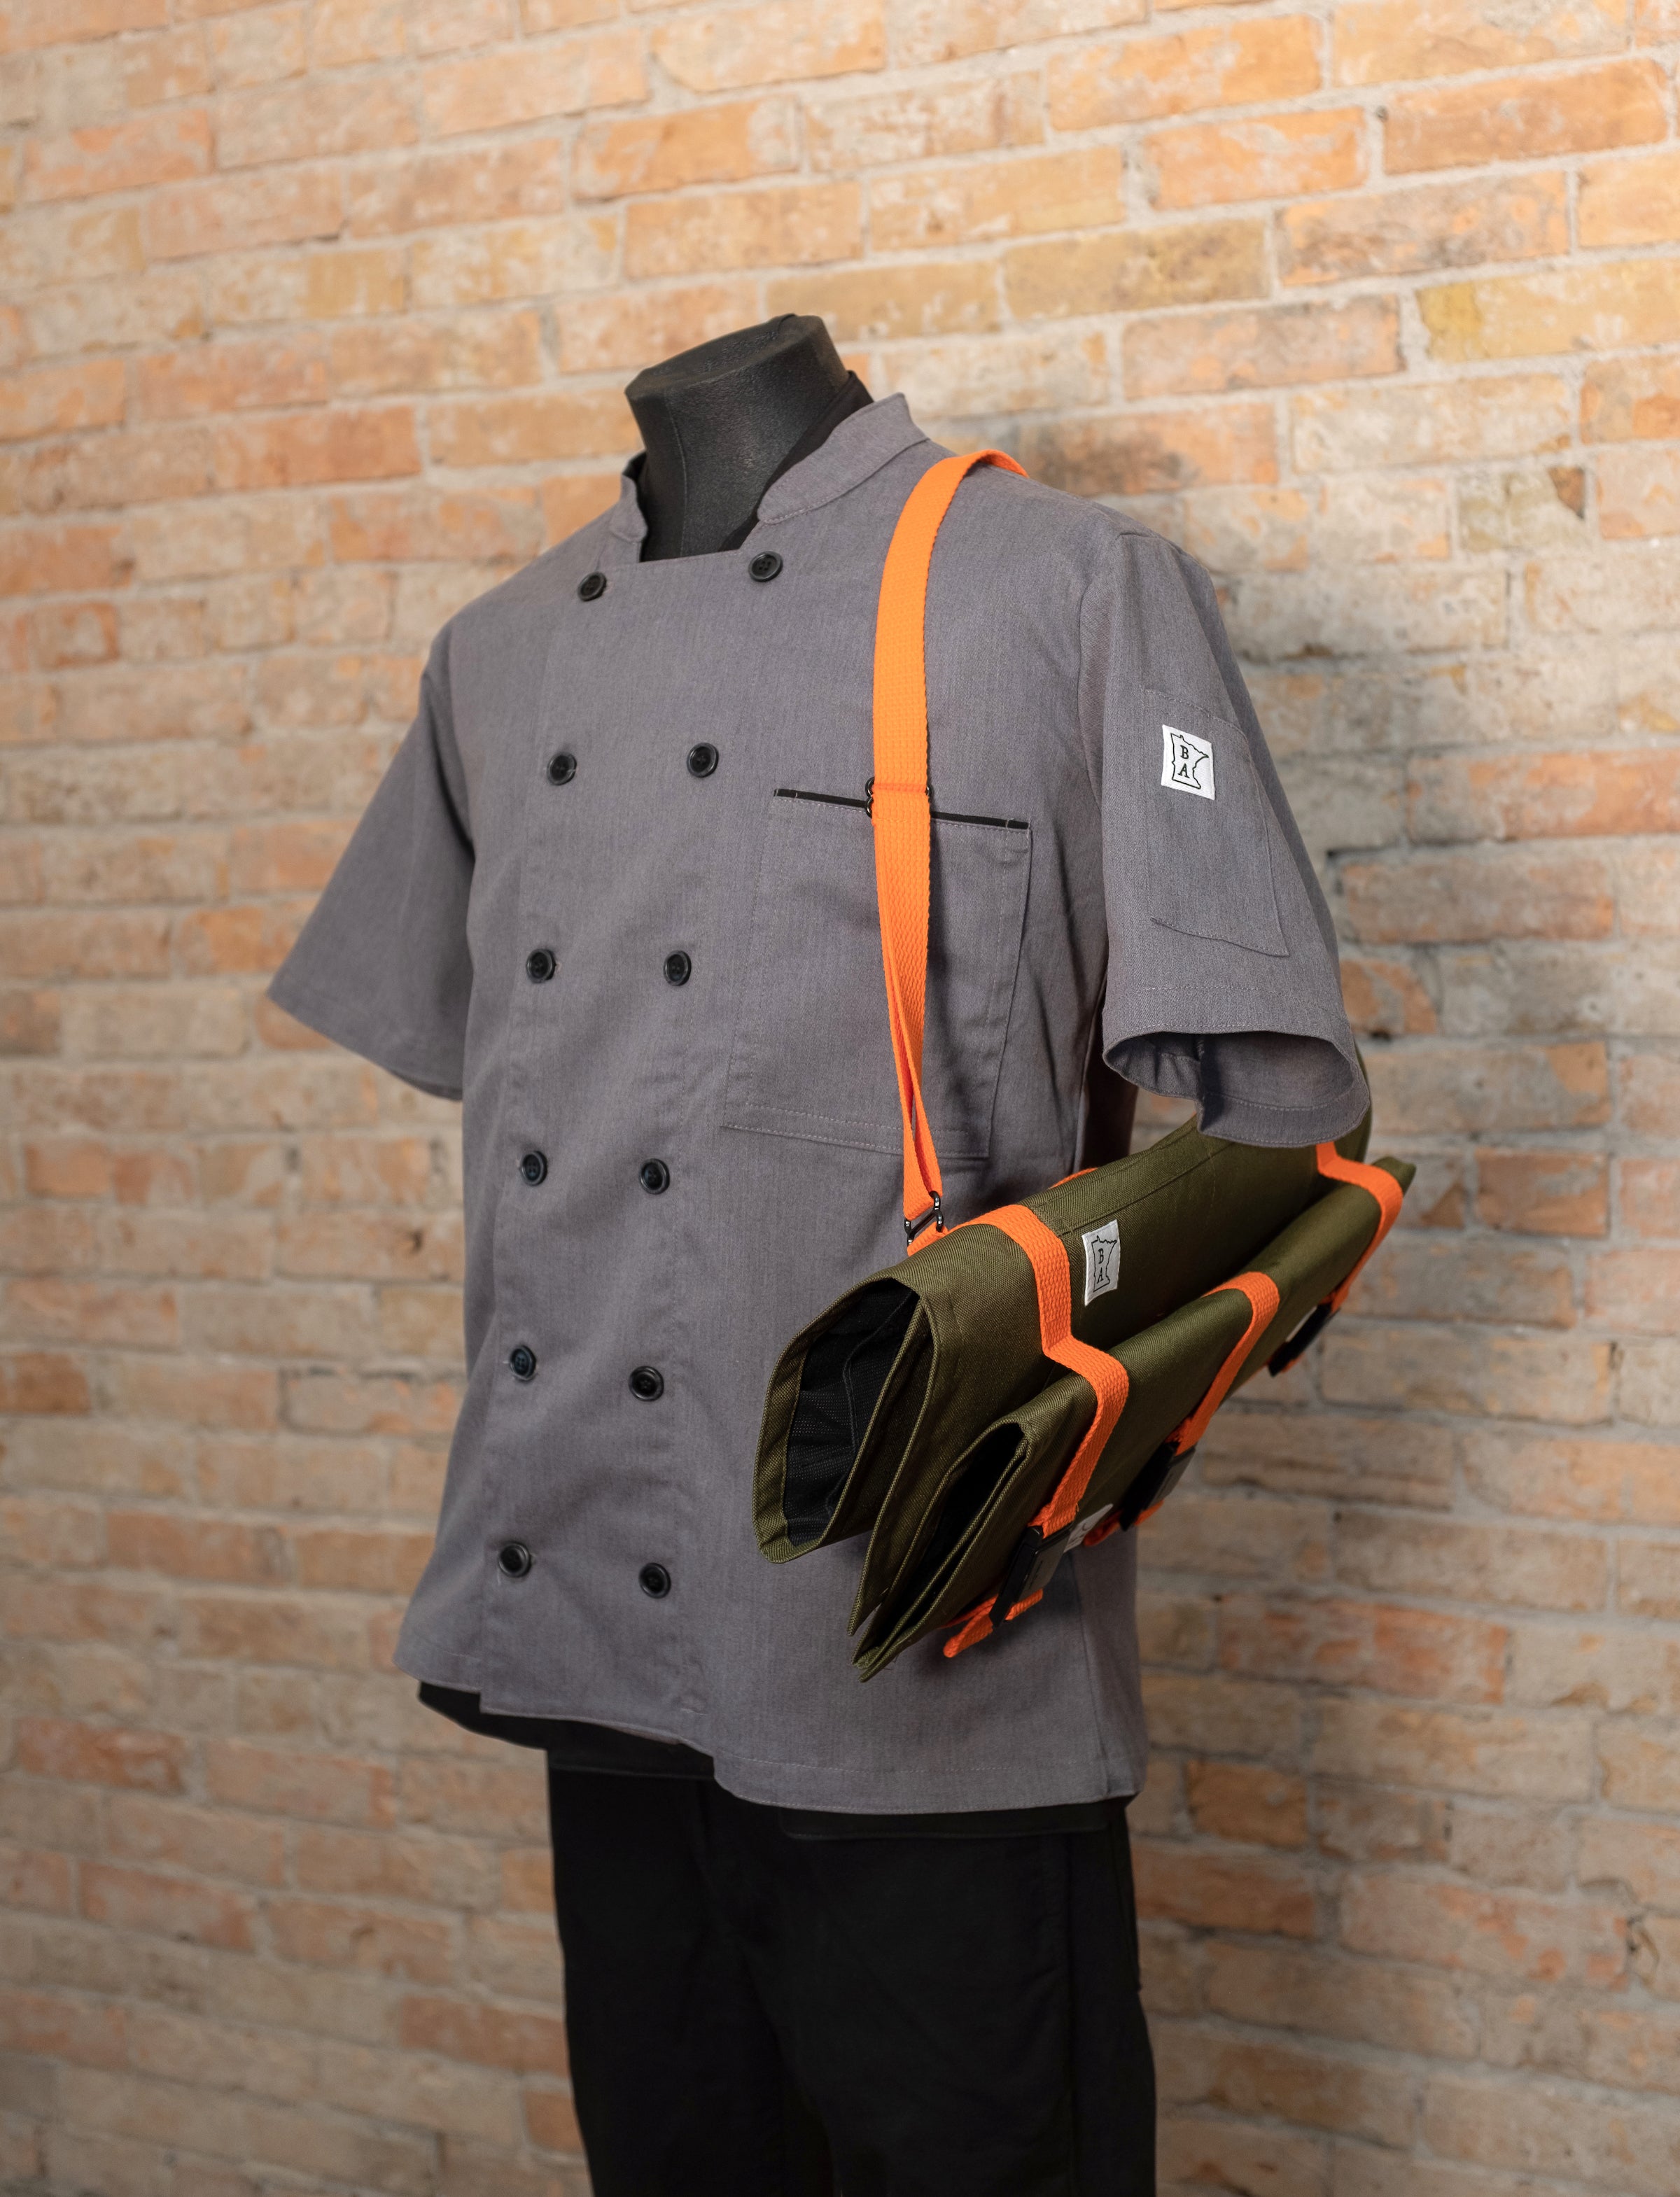 The Ottertex Edition Olive/Orange Main Squeeze and Side Hustle knife roll buckled together and slung over the shoulder of a mannequin wearing a gray chef coat. Both of the knife rolls and the chef coat were produced in Minnesota by Craftmade Aprons.